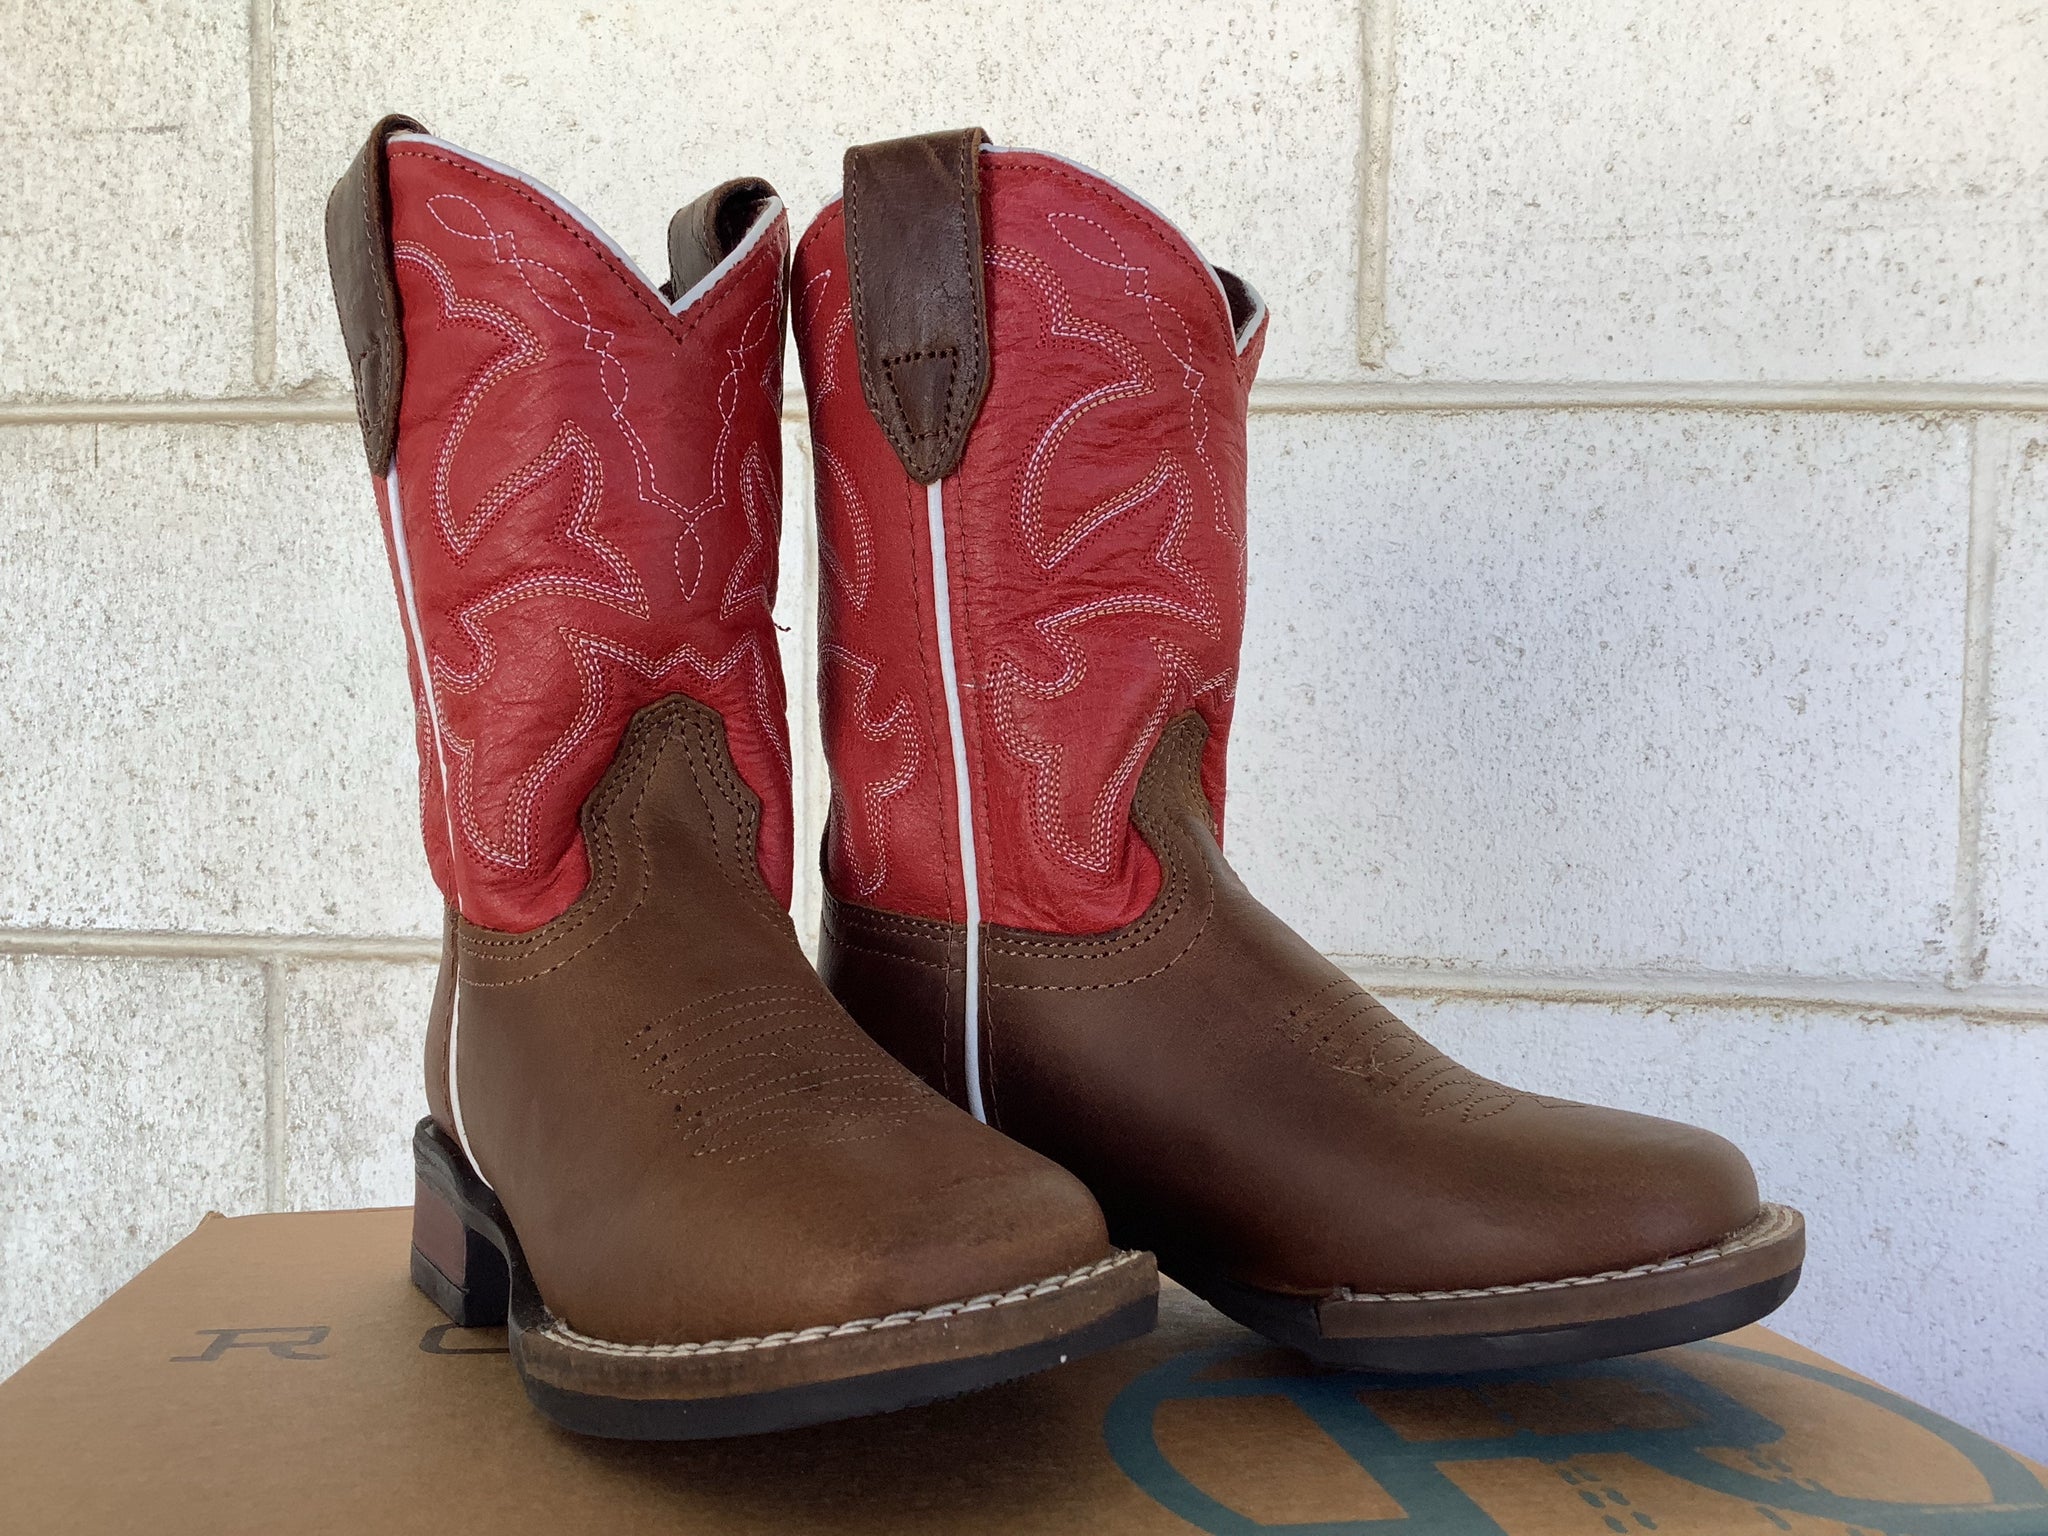 09-018-0911-2940 Roper Little Kids Monterey Tan/Red Leather Boots